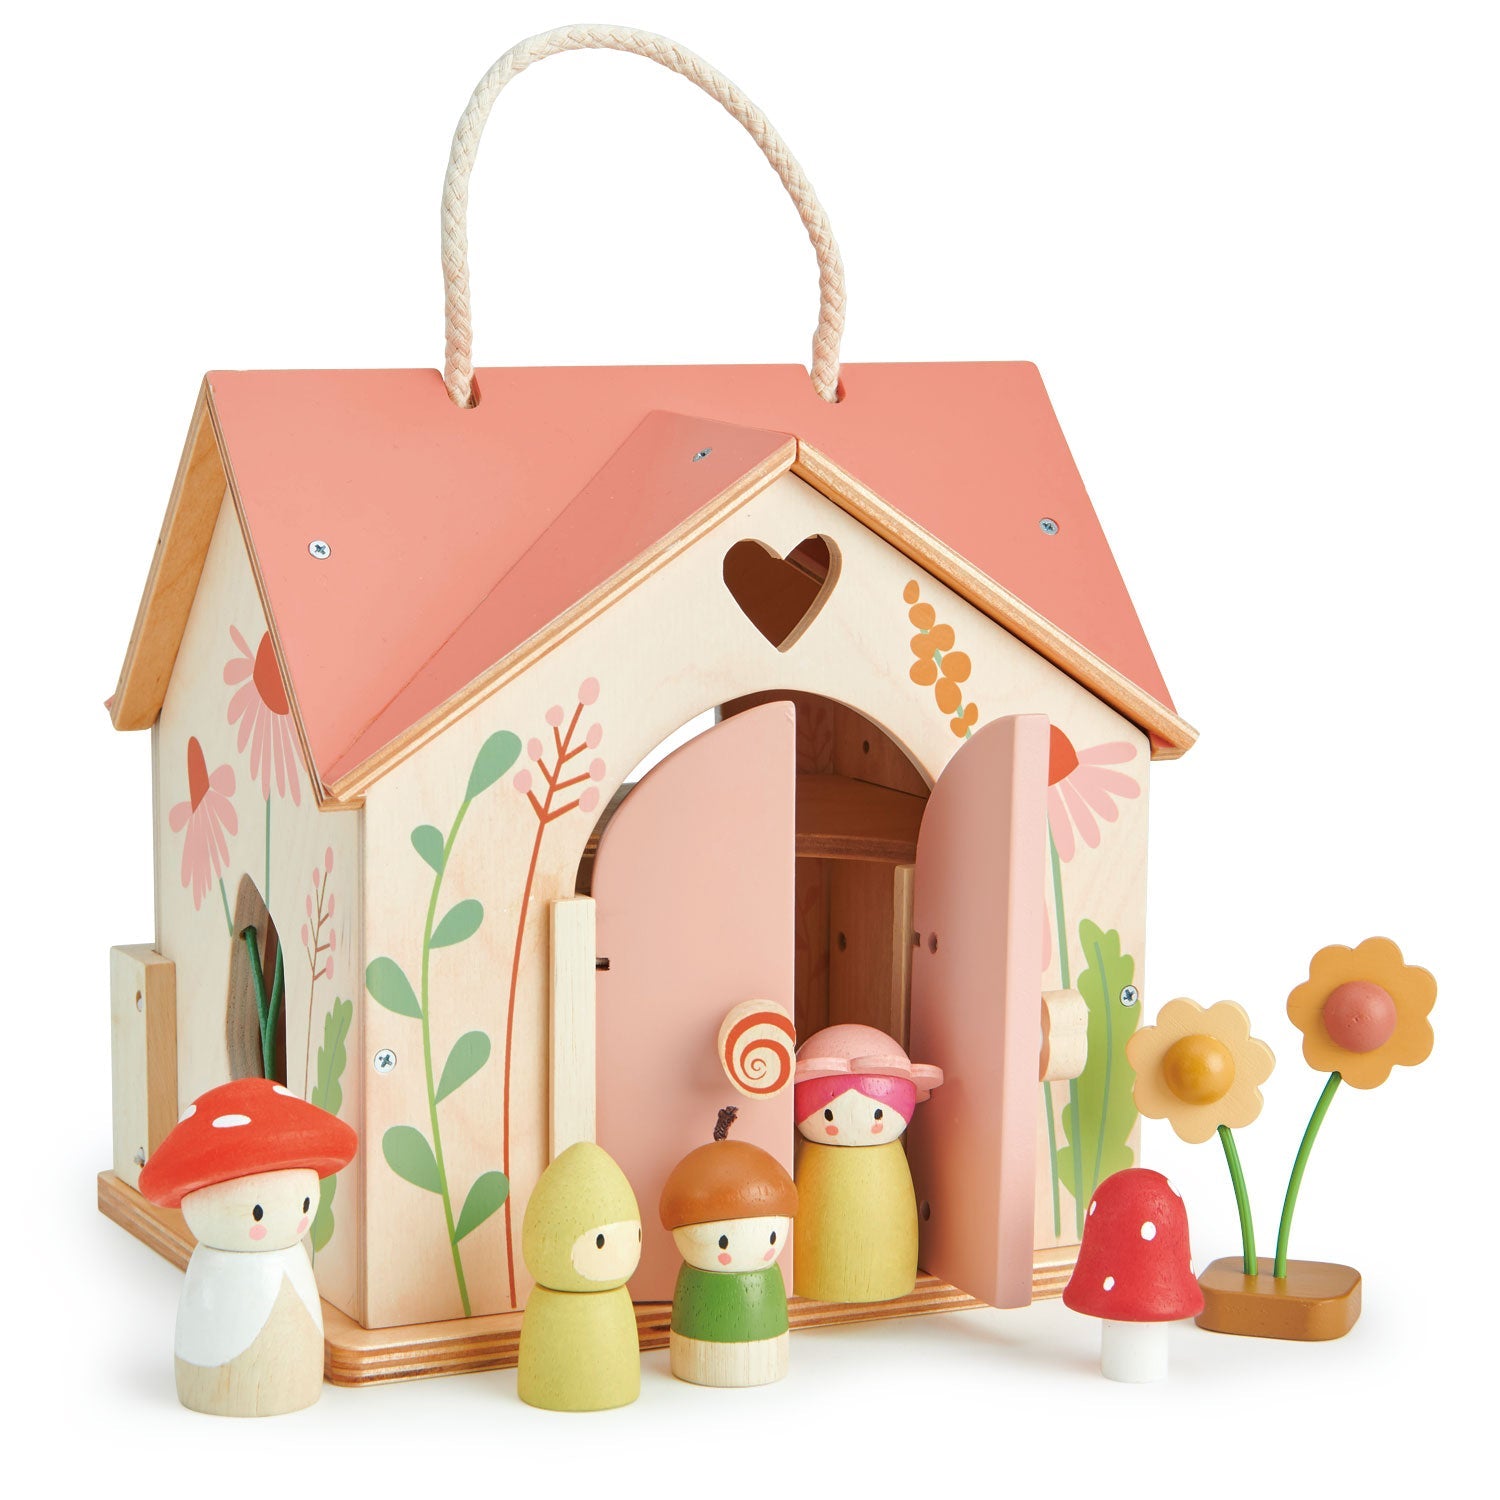 Tender Leaf Toys Rosewood Cottage - A compact and charming wooden dollhouse with rose-colored roof, wildflower decorations, and a removable back panel. Includes furniture and a family of four for imaginative play.